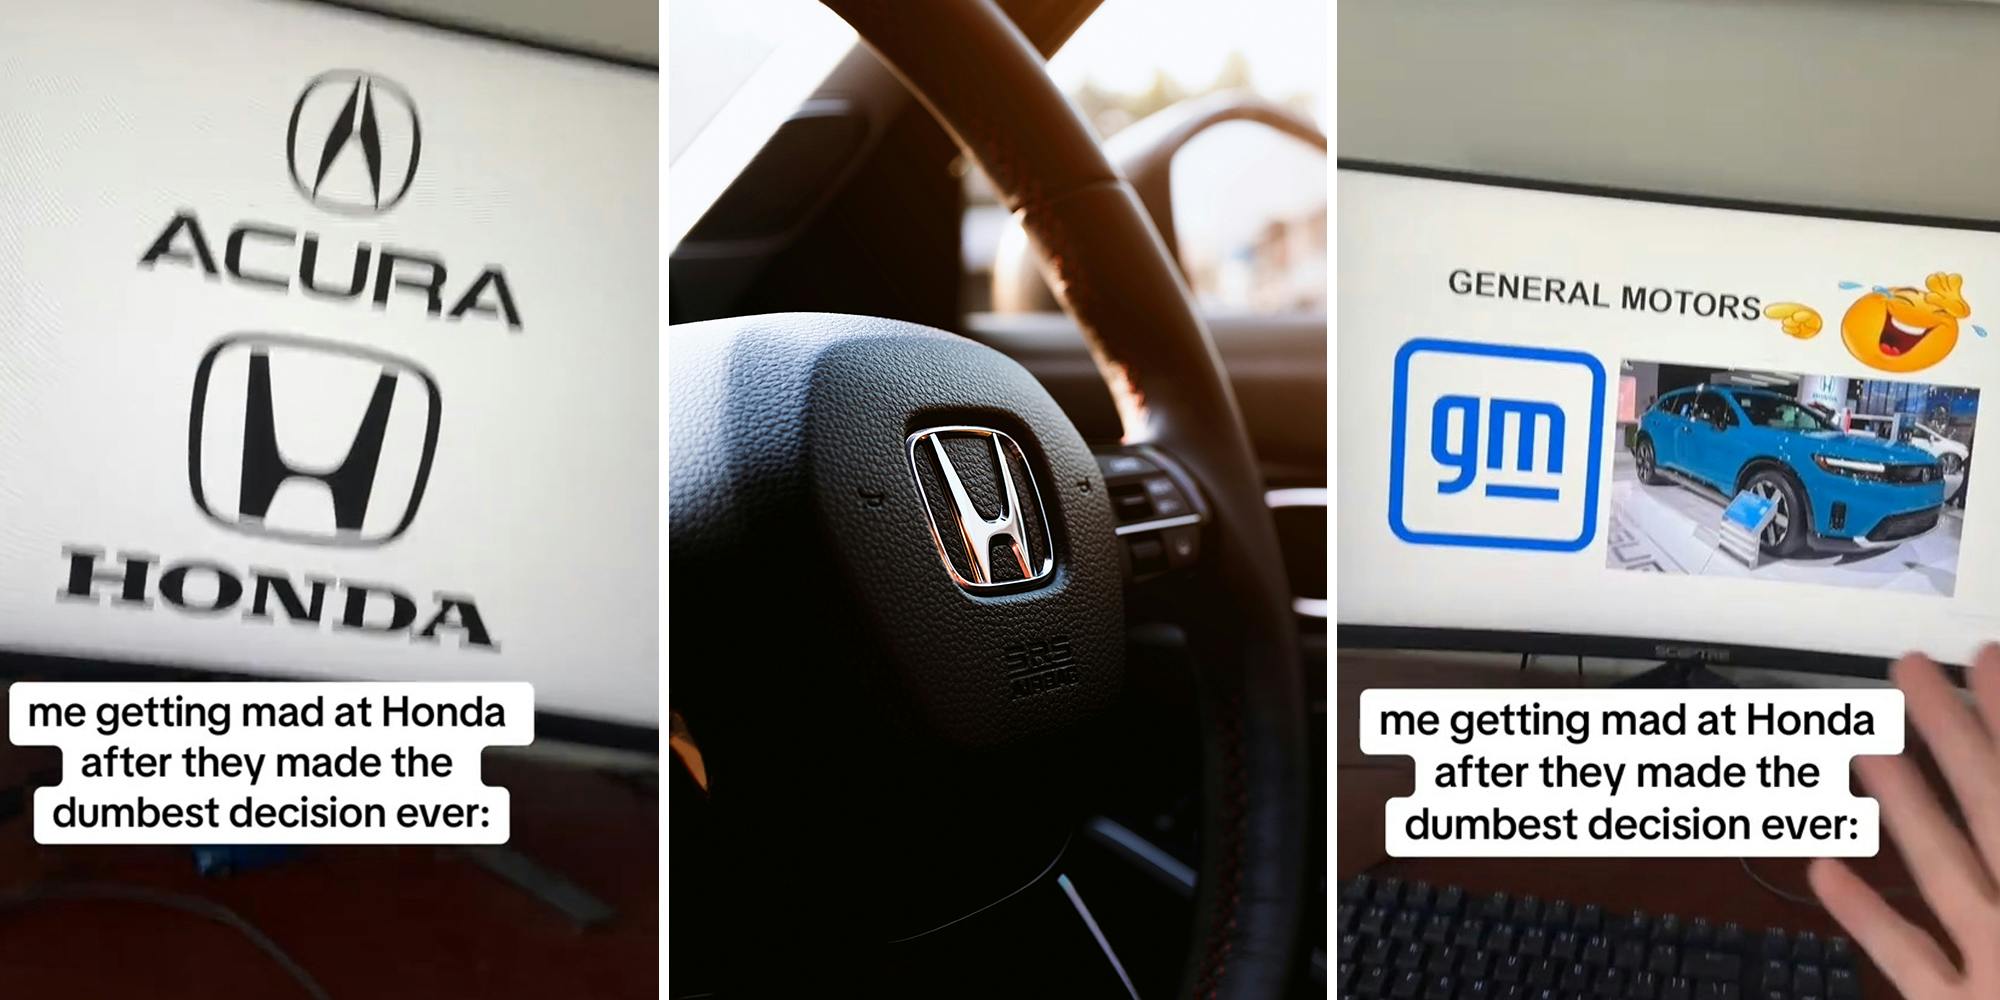 Expert blasts Honda for controversial new GM partnership and subsequent new model